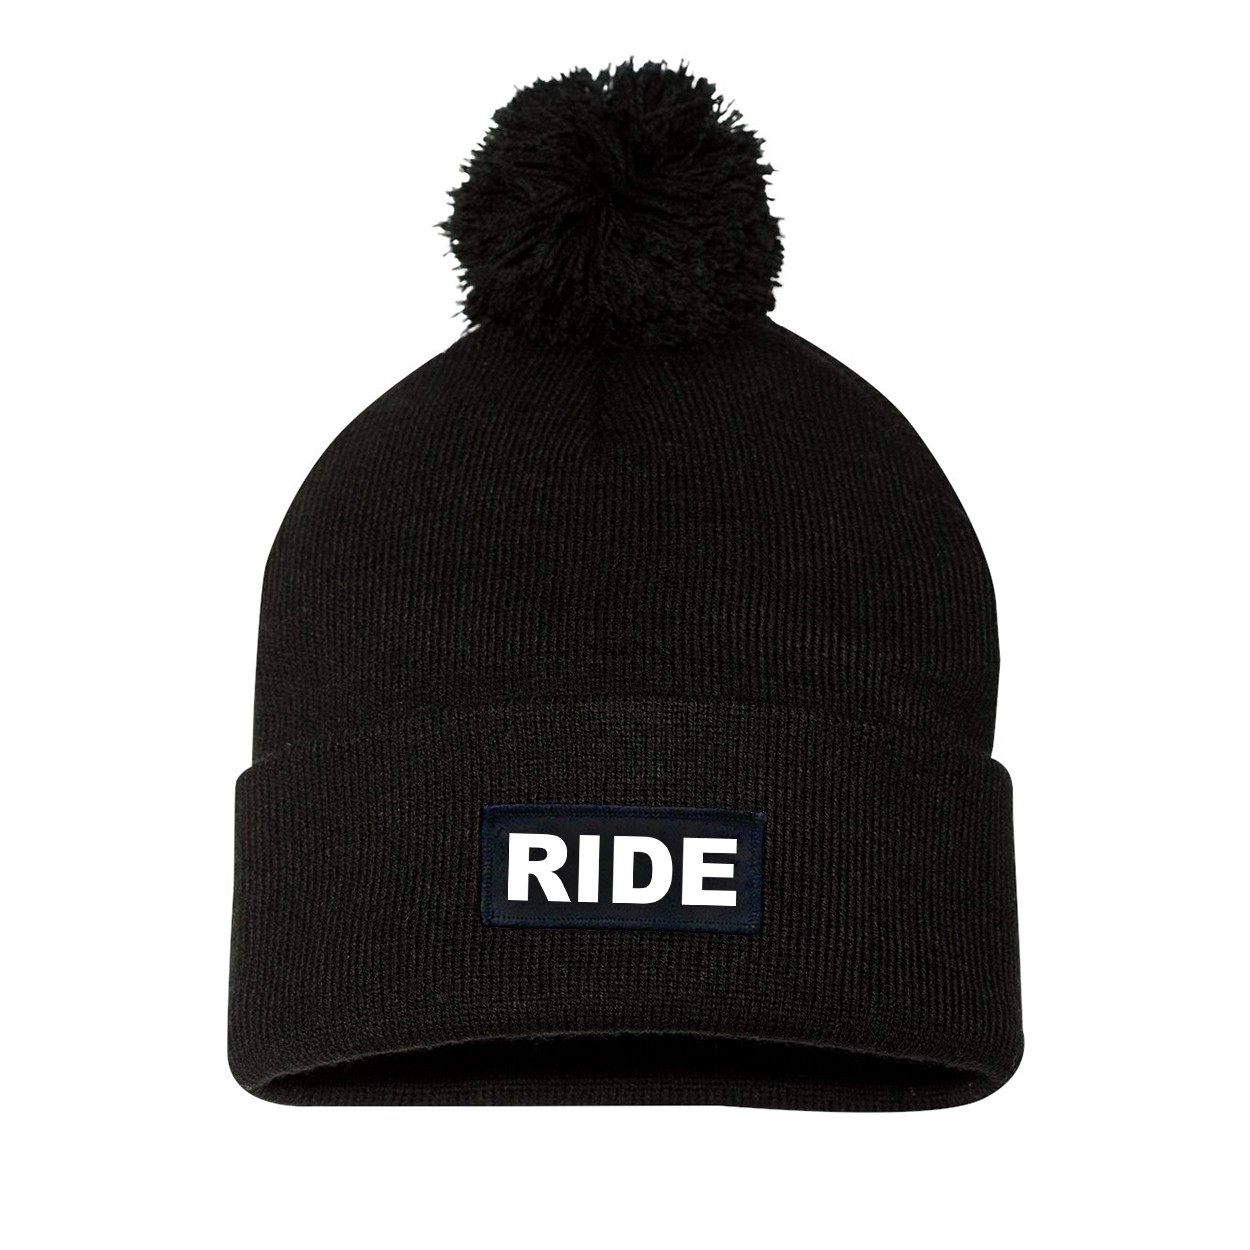 Ride Brand Logo Night Out Woven Patch Roll Up Pom Knit Beanie Black (White Logo)